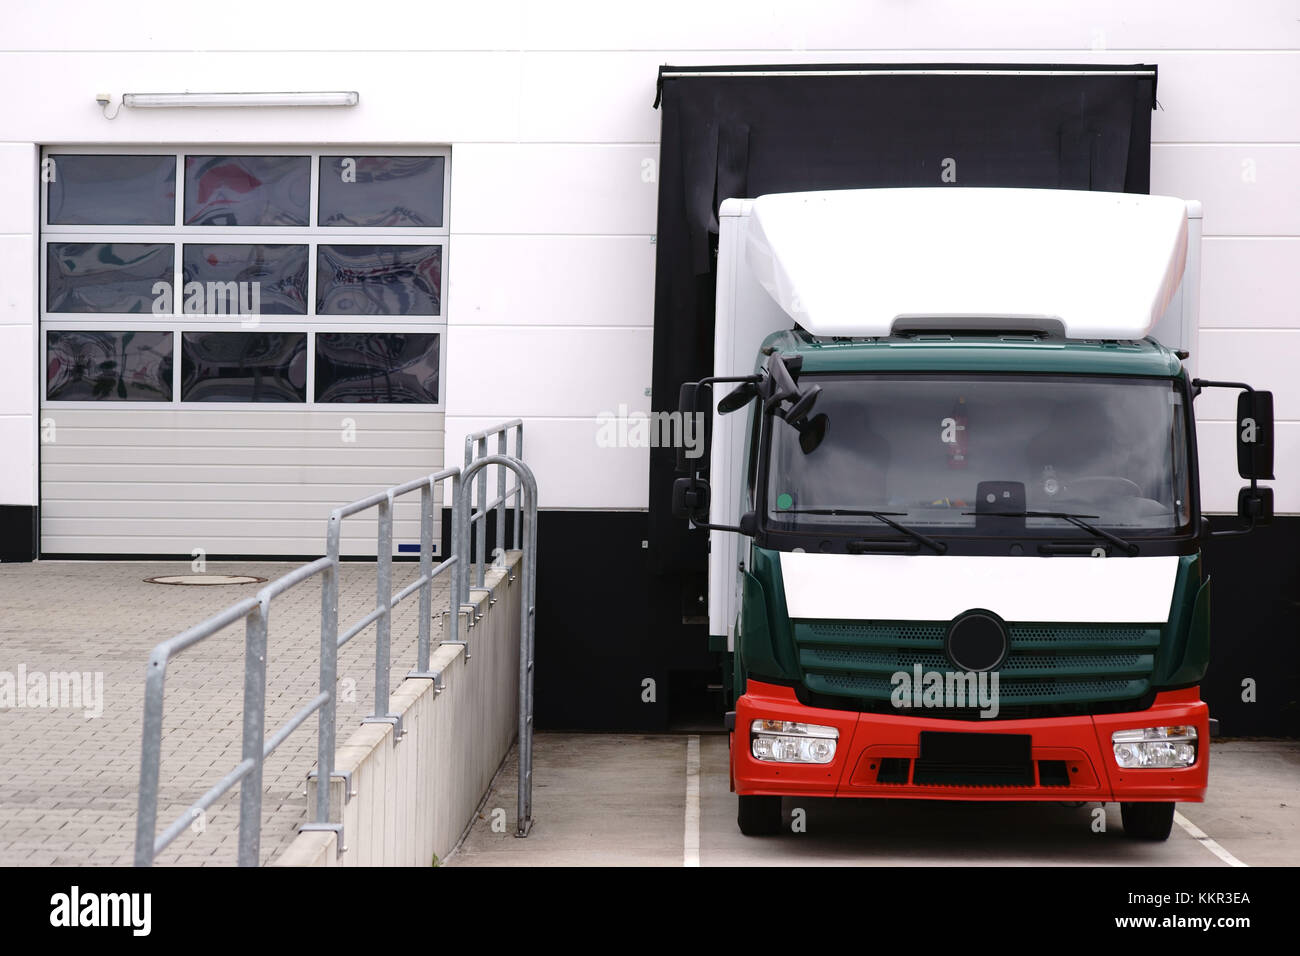 Truck Parking High Resolution Stock Photography and Images - Alamy